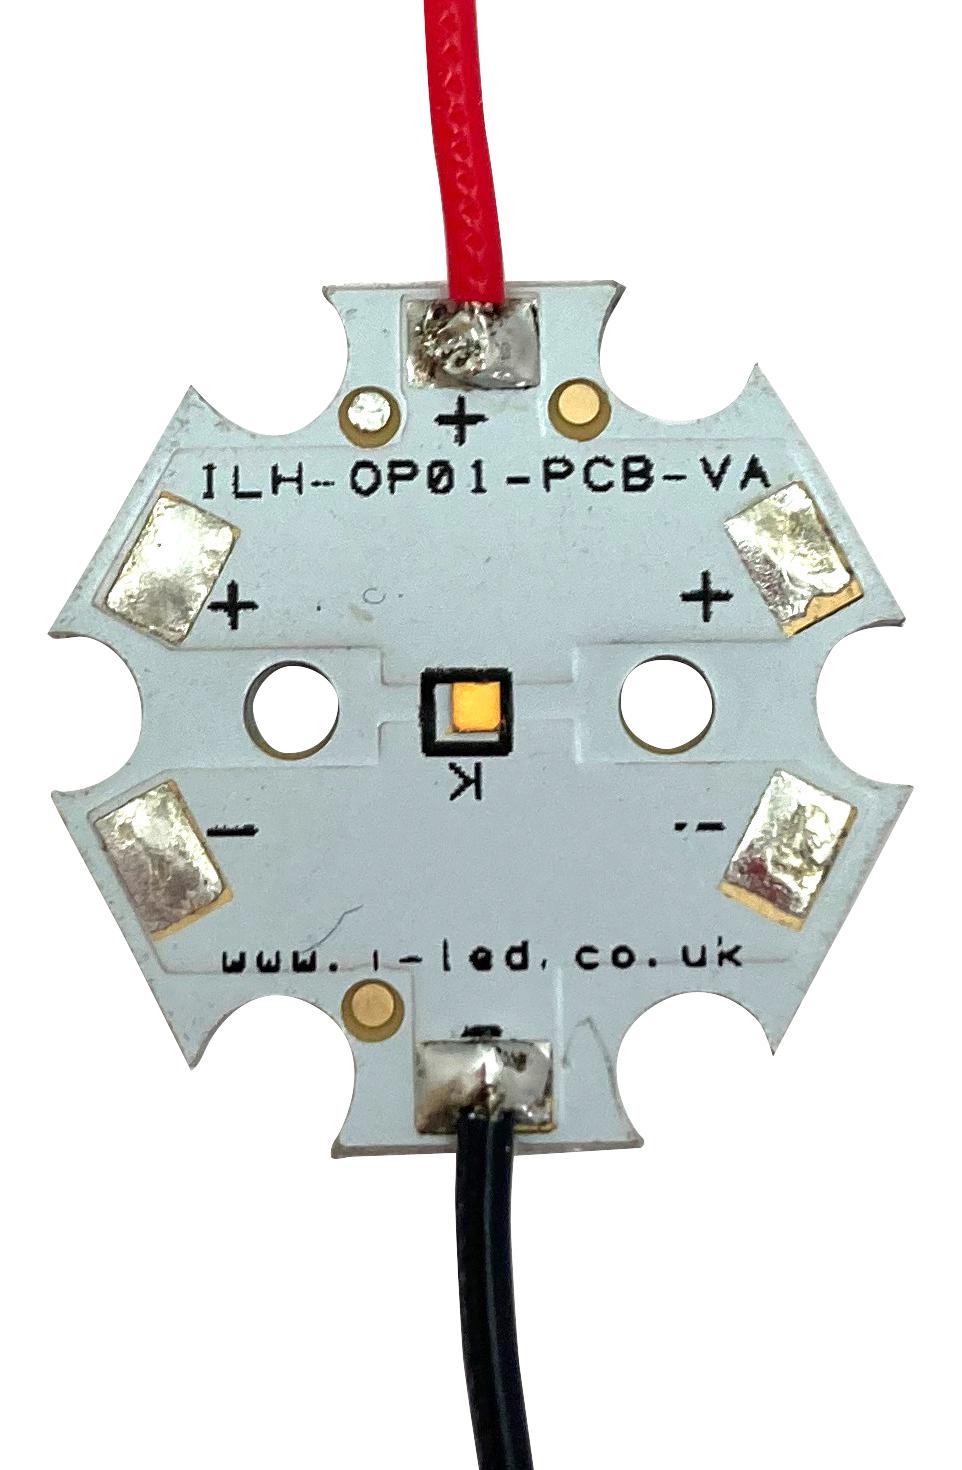 ILH-OP01-HW90-SC221-WIR200. LED MODULE, HOT WHITE, 65LM, 2700K, STAR INTELLIGENT LED SOLUTIONS